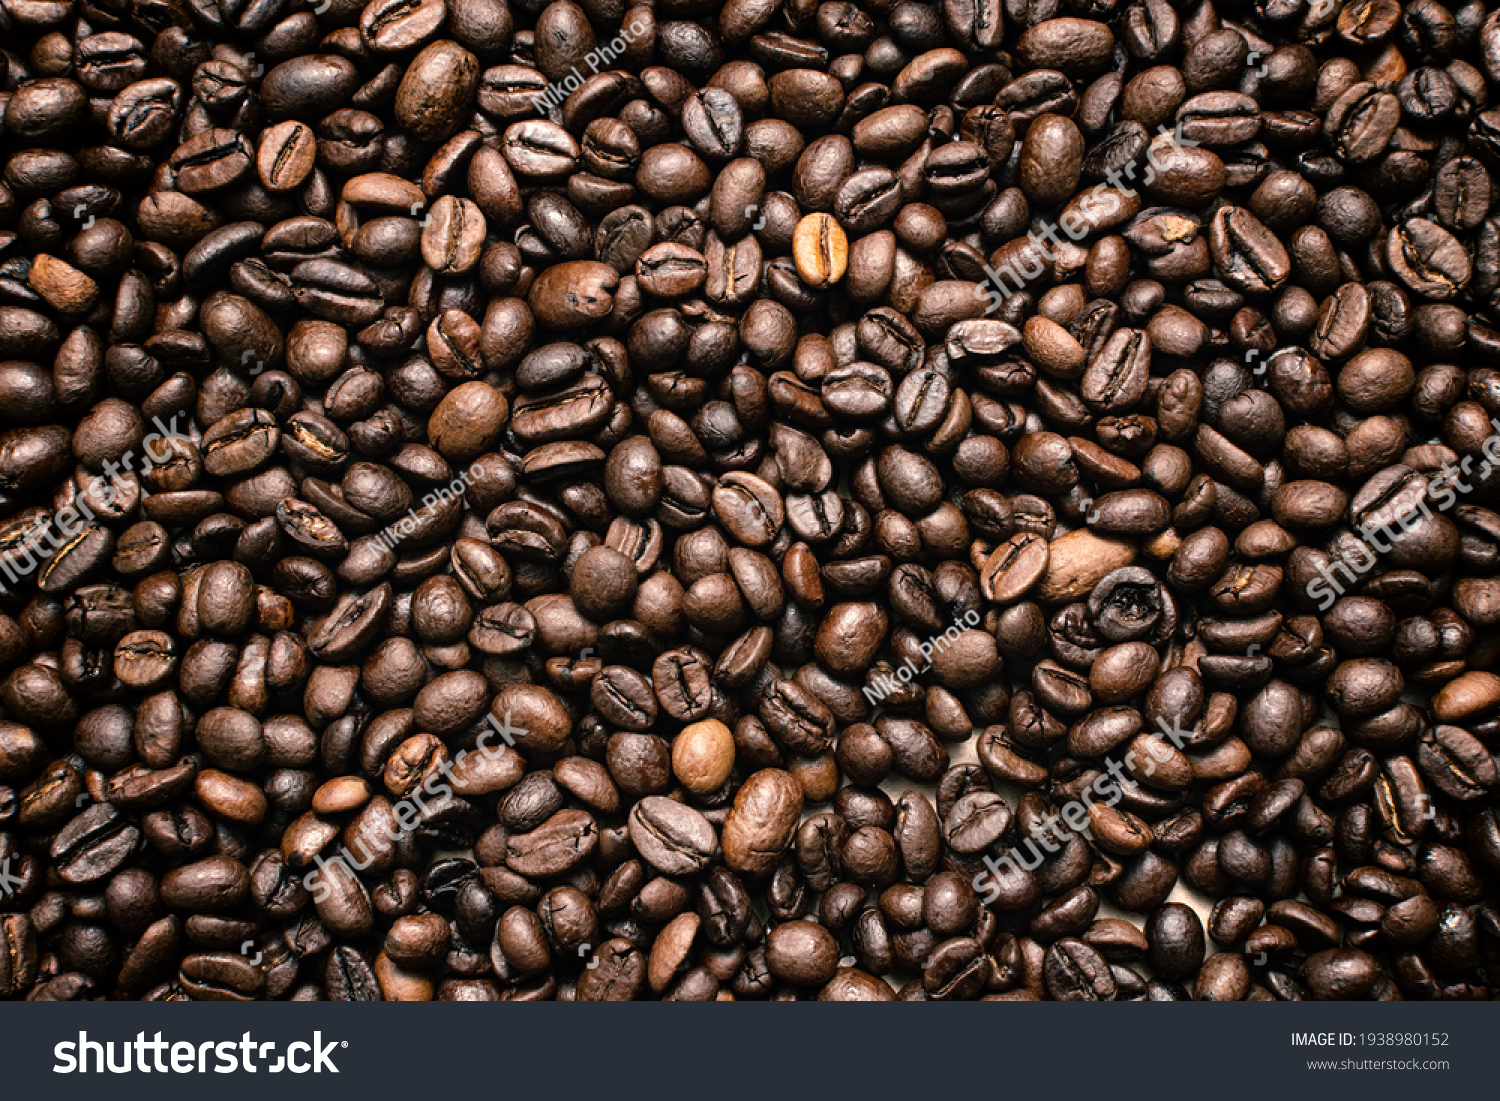 Coffee beans. Coffee beans are spread out on the surface. #1938980152